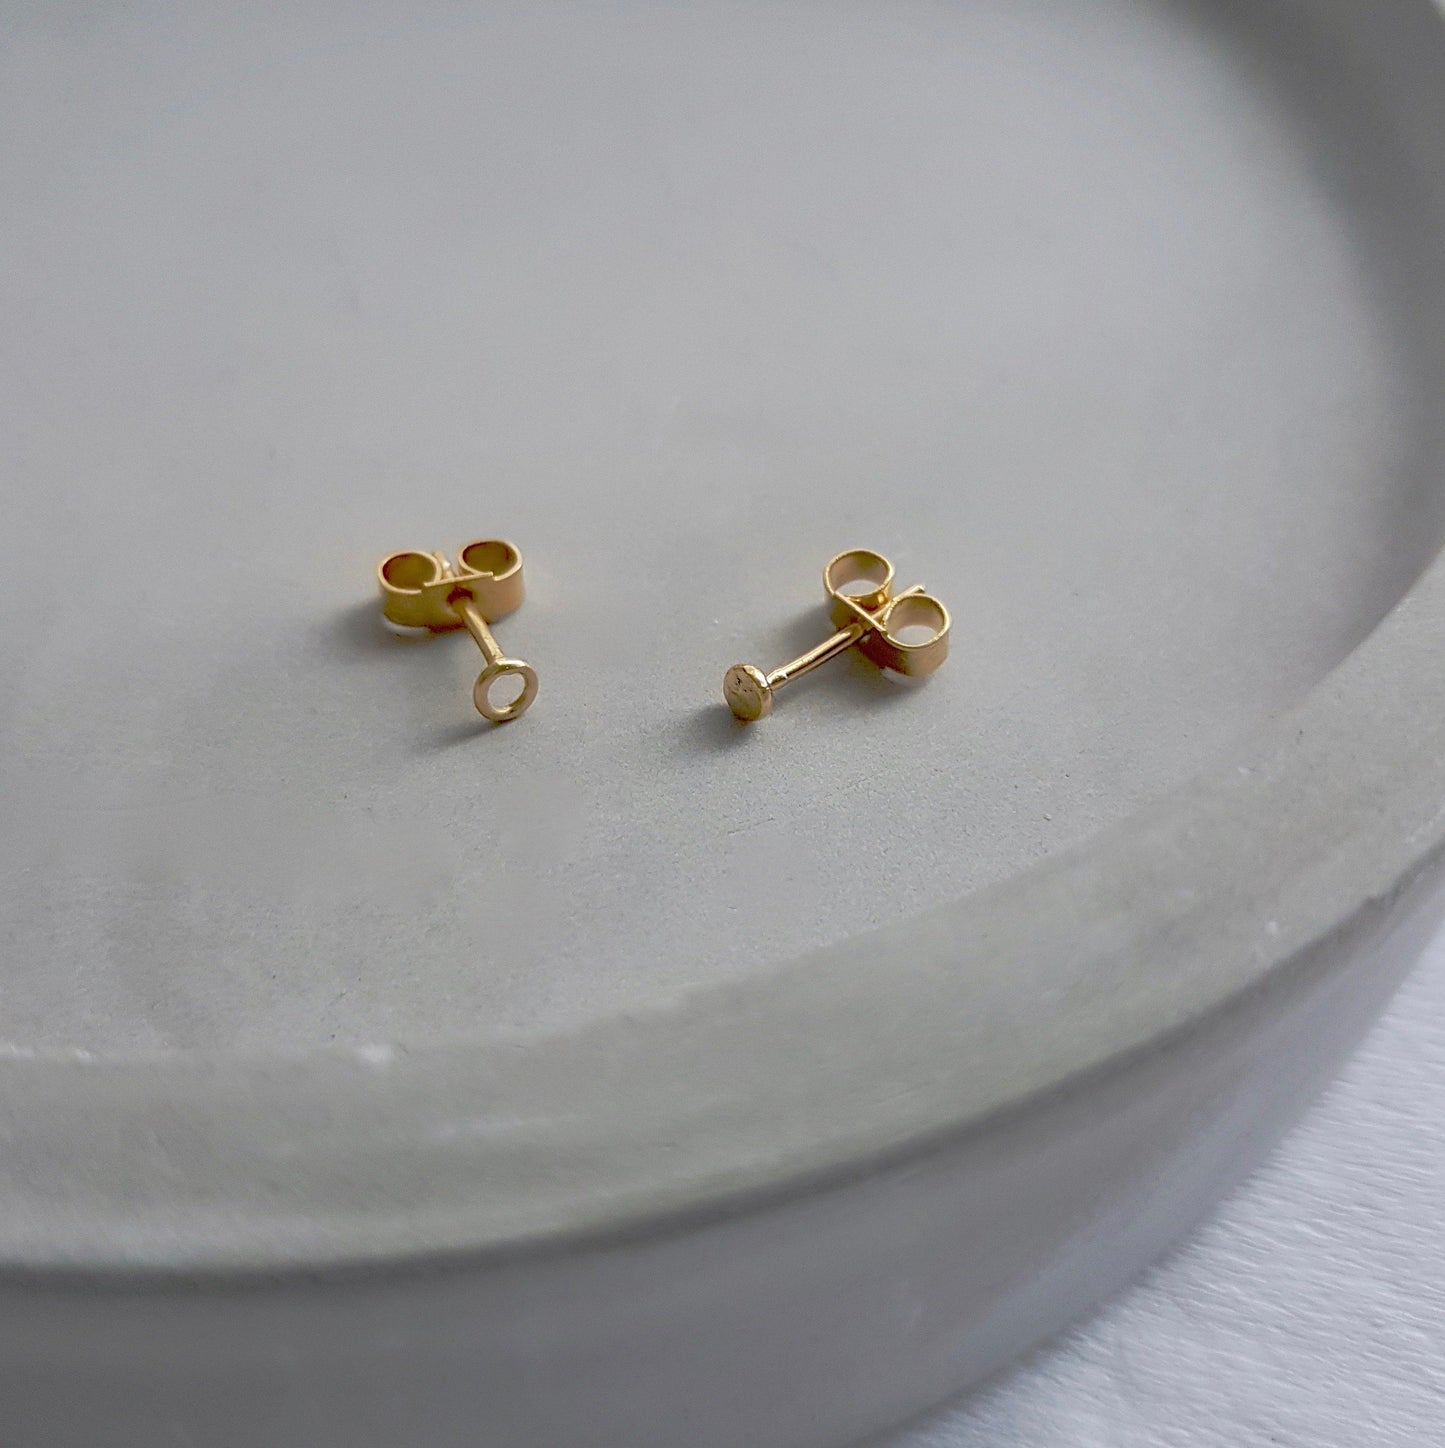 Mismatched Gold Studs - Tiny Circle and link Earrings Handmade by Anna Calvert Jewellery in the UK